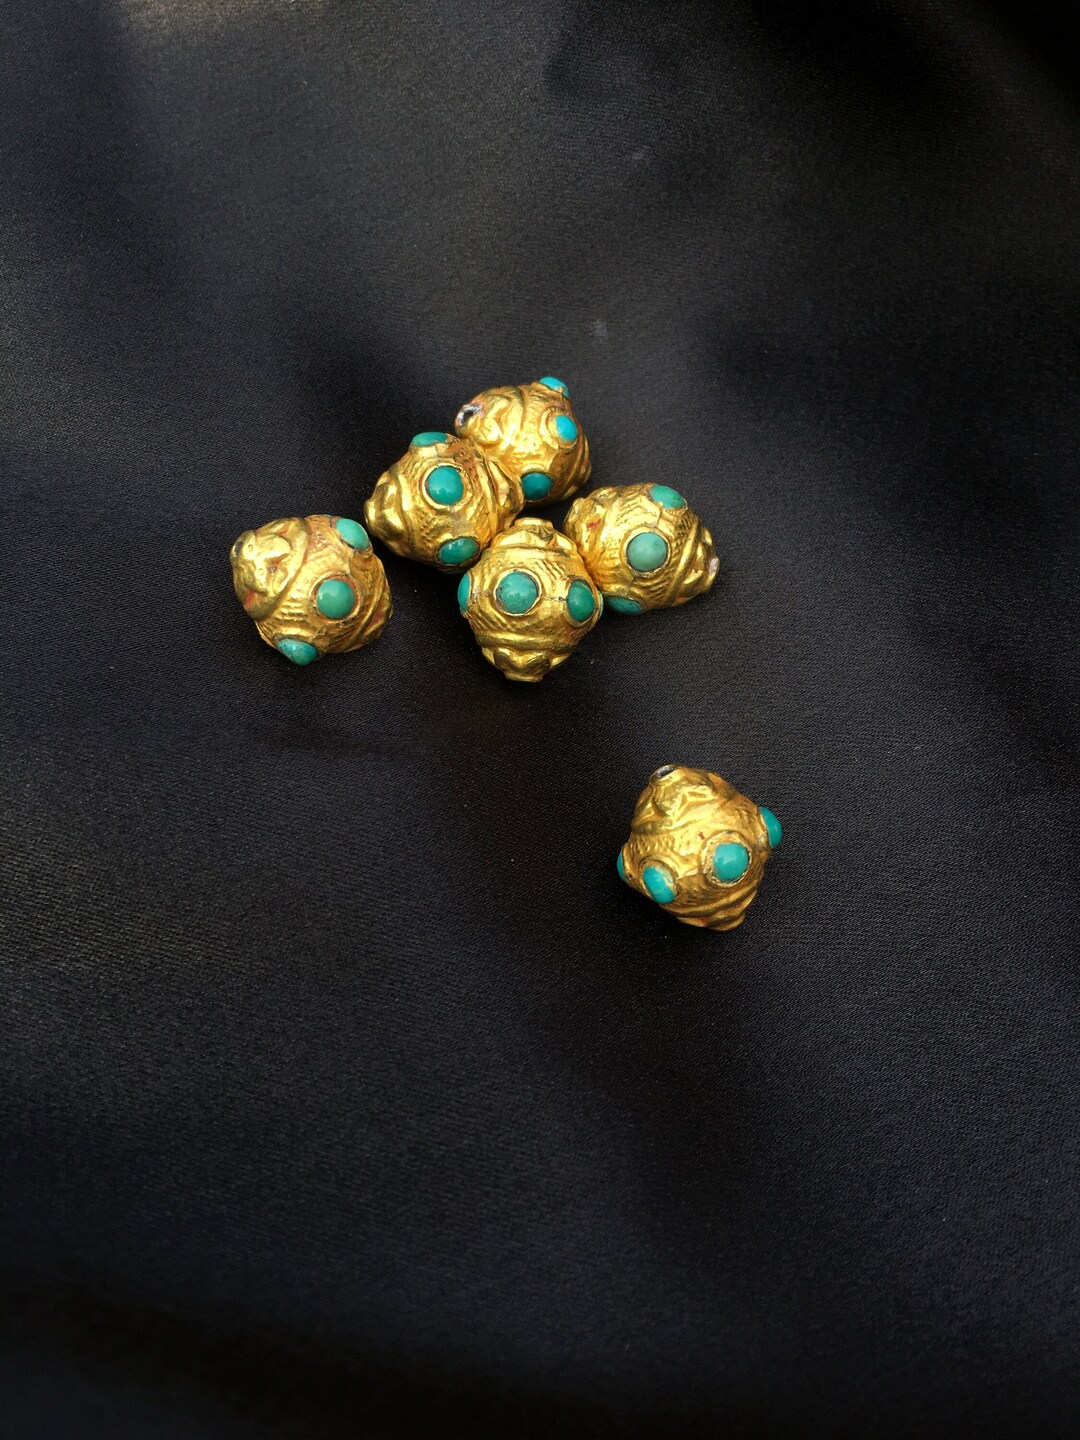 15mm 14k Gold Wax Beads With Gemstone Gold Ball Beads Textured - Etsy